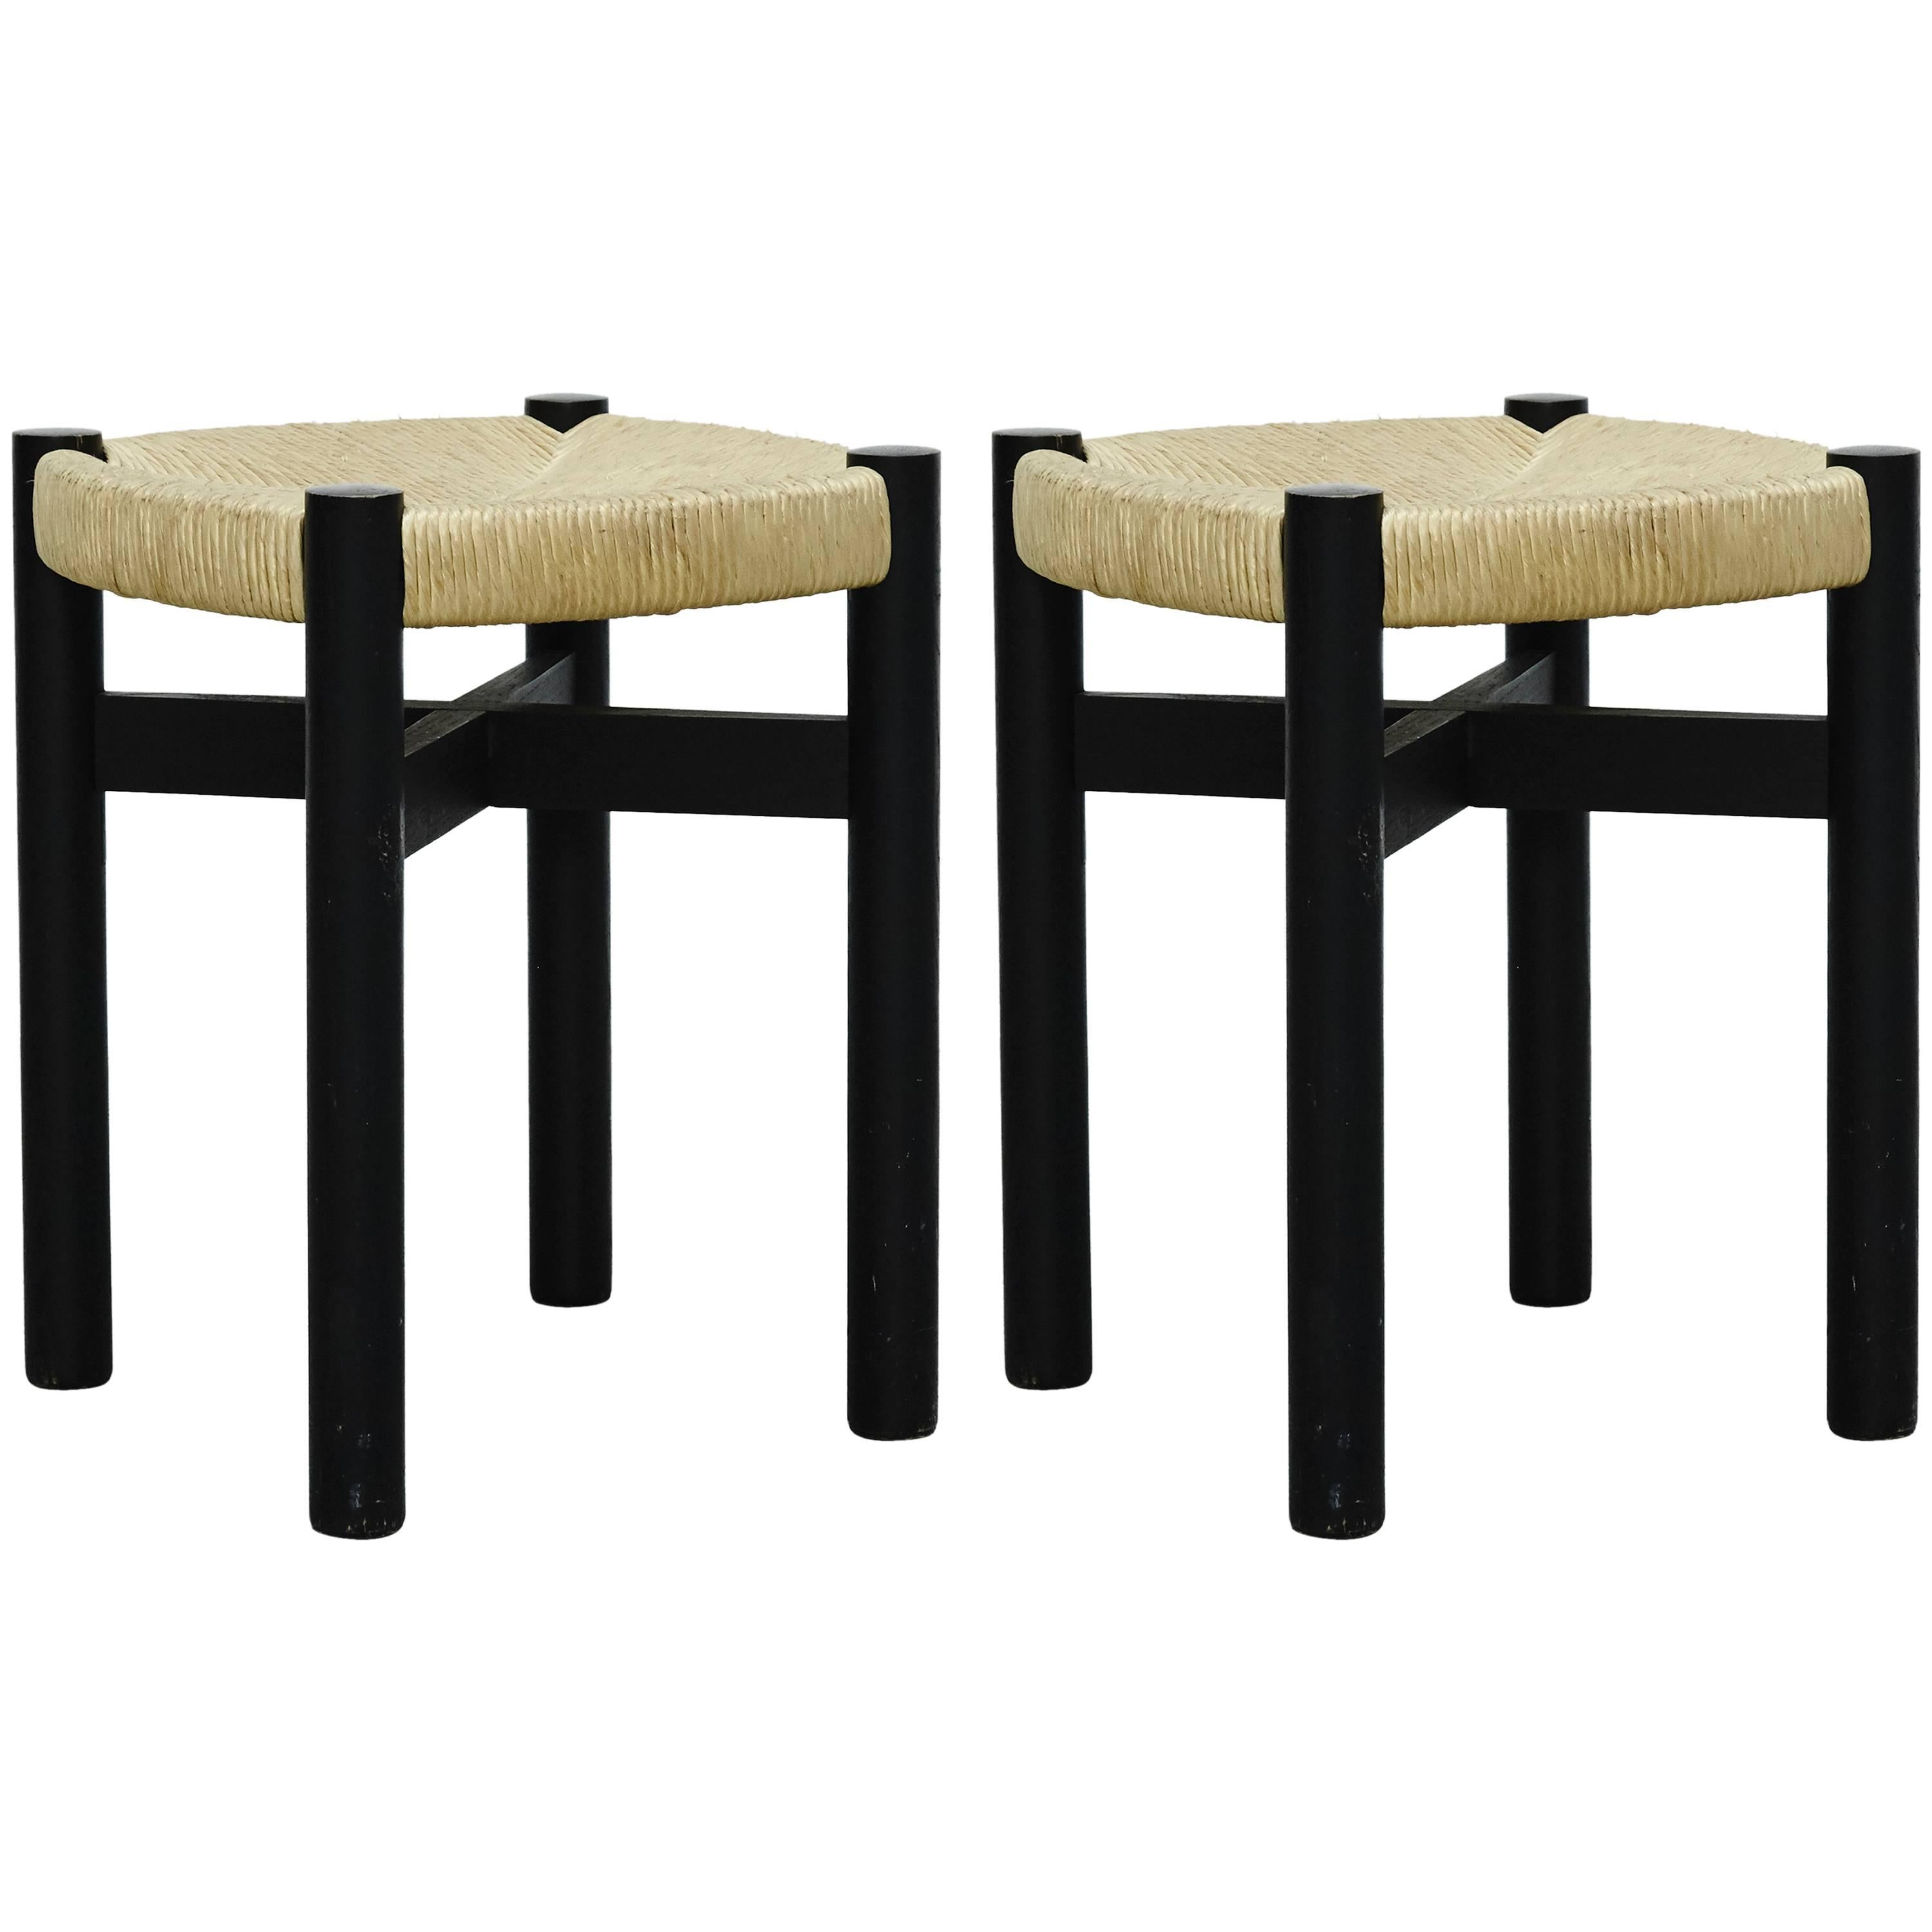 Pair of Stools by Charlotte Perriand for Meribel, circa 1950